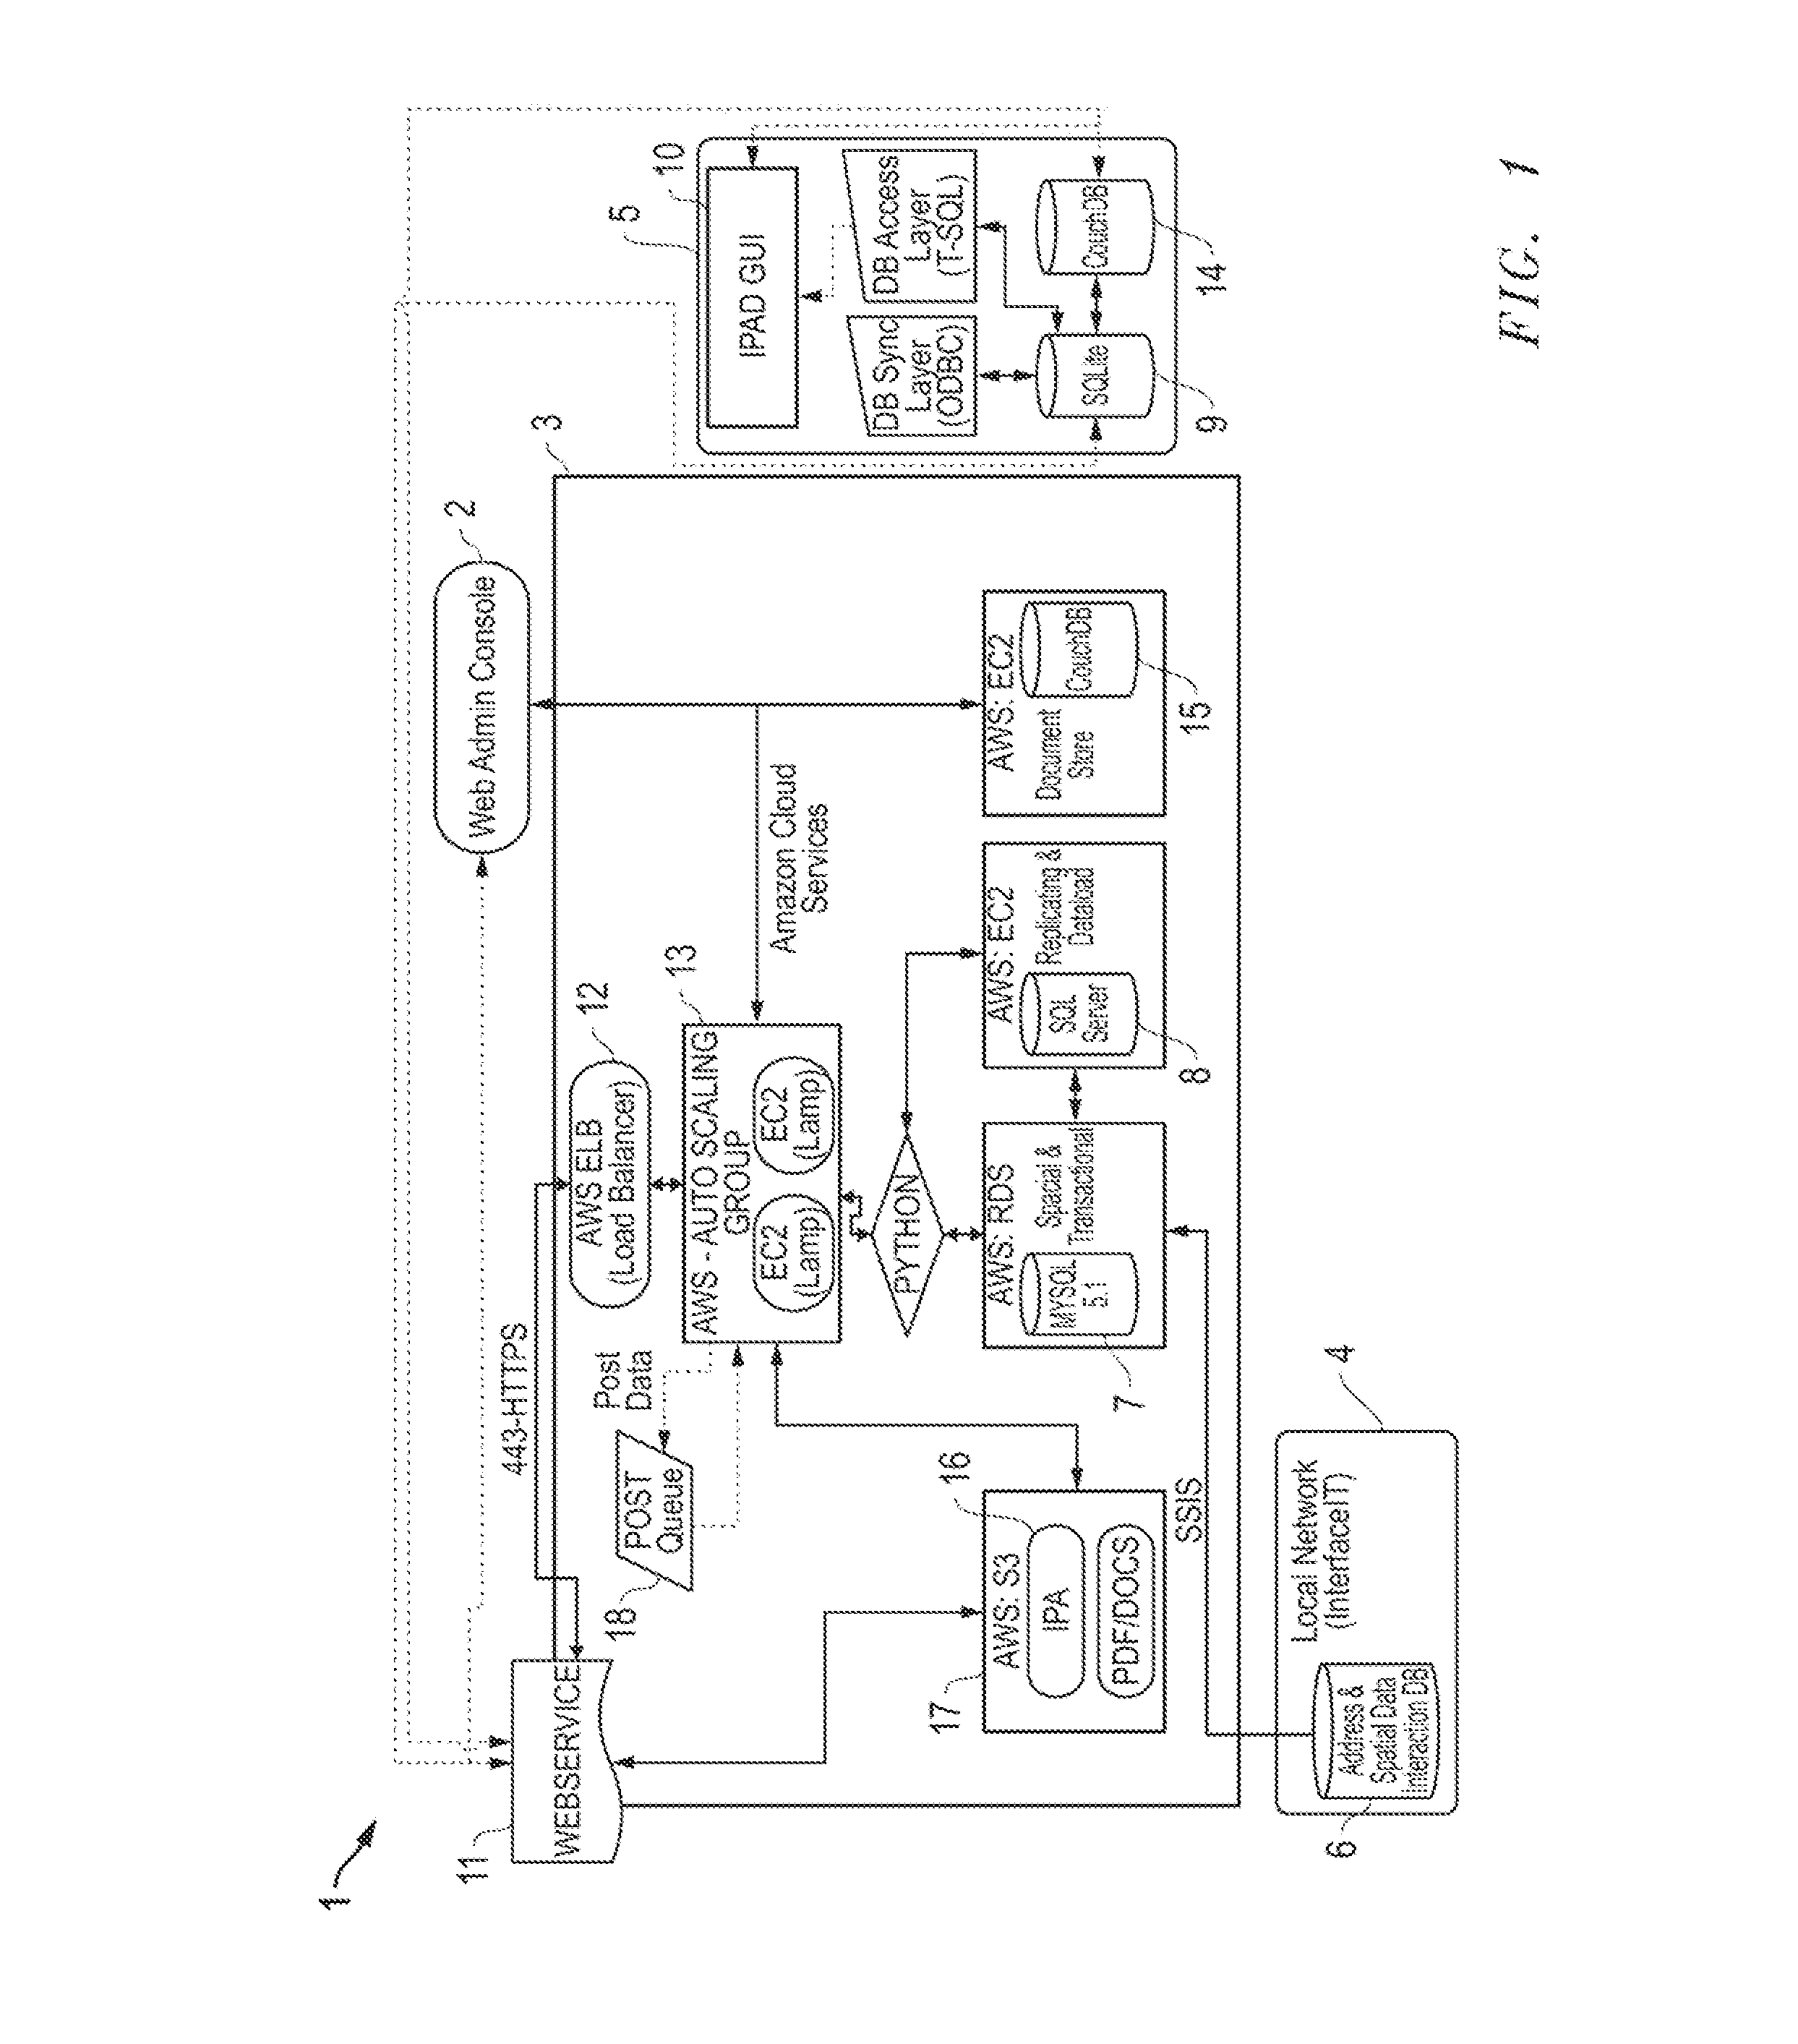 System, Apparatus and Method for Customer Requisition and Retention Via Real-time Information